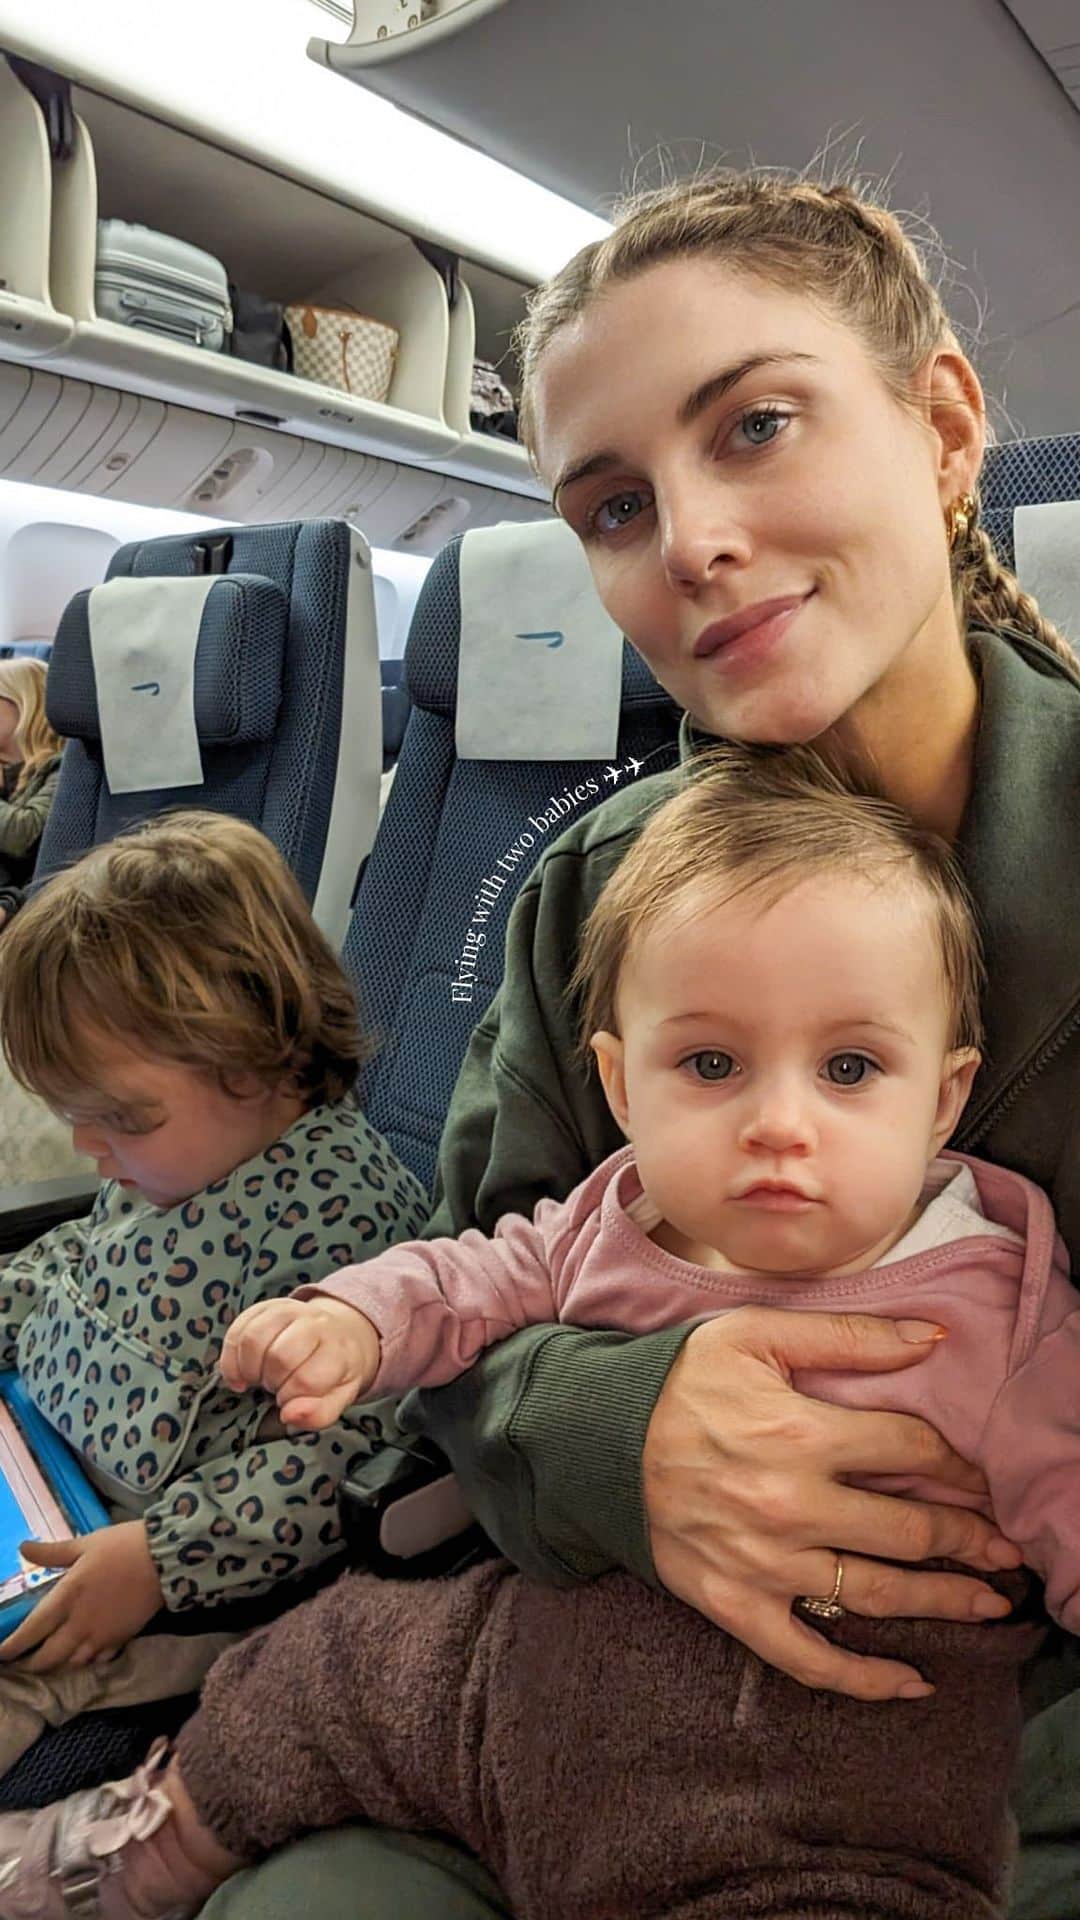 Ashley Jamesのインスタグラム：「12 hour flight with two babies ... Completed it! 💓✈️  This is obviously a joke, but felt very lucky to have Tommy’s parents on the plane with us! Nana sat next to us the whole way, although to be honest both littles were amazing. 🙏✈️  We took a night flight and packed lots of snacks! It was alf’s first time having his own chair and he was really good. He loved watching the movie Trolls on the screen, even though he didn’t want to wear the headphones!  We gave him chocolate buttons and his milk in a straw for take off and landing and he had no issue with his ears. And we eventually put our hand luggage stacked up on the floor so he could lay his legs out. He slept pretty much 9 out of the 12 hours!  Ada Breastfed on take off and landing, and loved waving at everyone on the plane. We were SO happy that she went to sleep in her bassinet that they put up in front of your seat, as when Alf was little he’d never go in. But it felt like every time we got her into it, the seatbelt sign went off. Then she’d wake up and we’d have to start all over again.   I brought my nursing pillow, as I remembered how good it was with Alf and that meant we both got to sleep for a while with her on me.   I saved all my hand luggage tips in a highlights, but I’d say in the end we didn’t need hardly as much as we thought. Which is great because they actually wanted to sleep.  The return is a day flight so we’ll see how that goes. But anyway, the biggest tip is to pack nana. 🤪💓✈️」